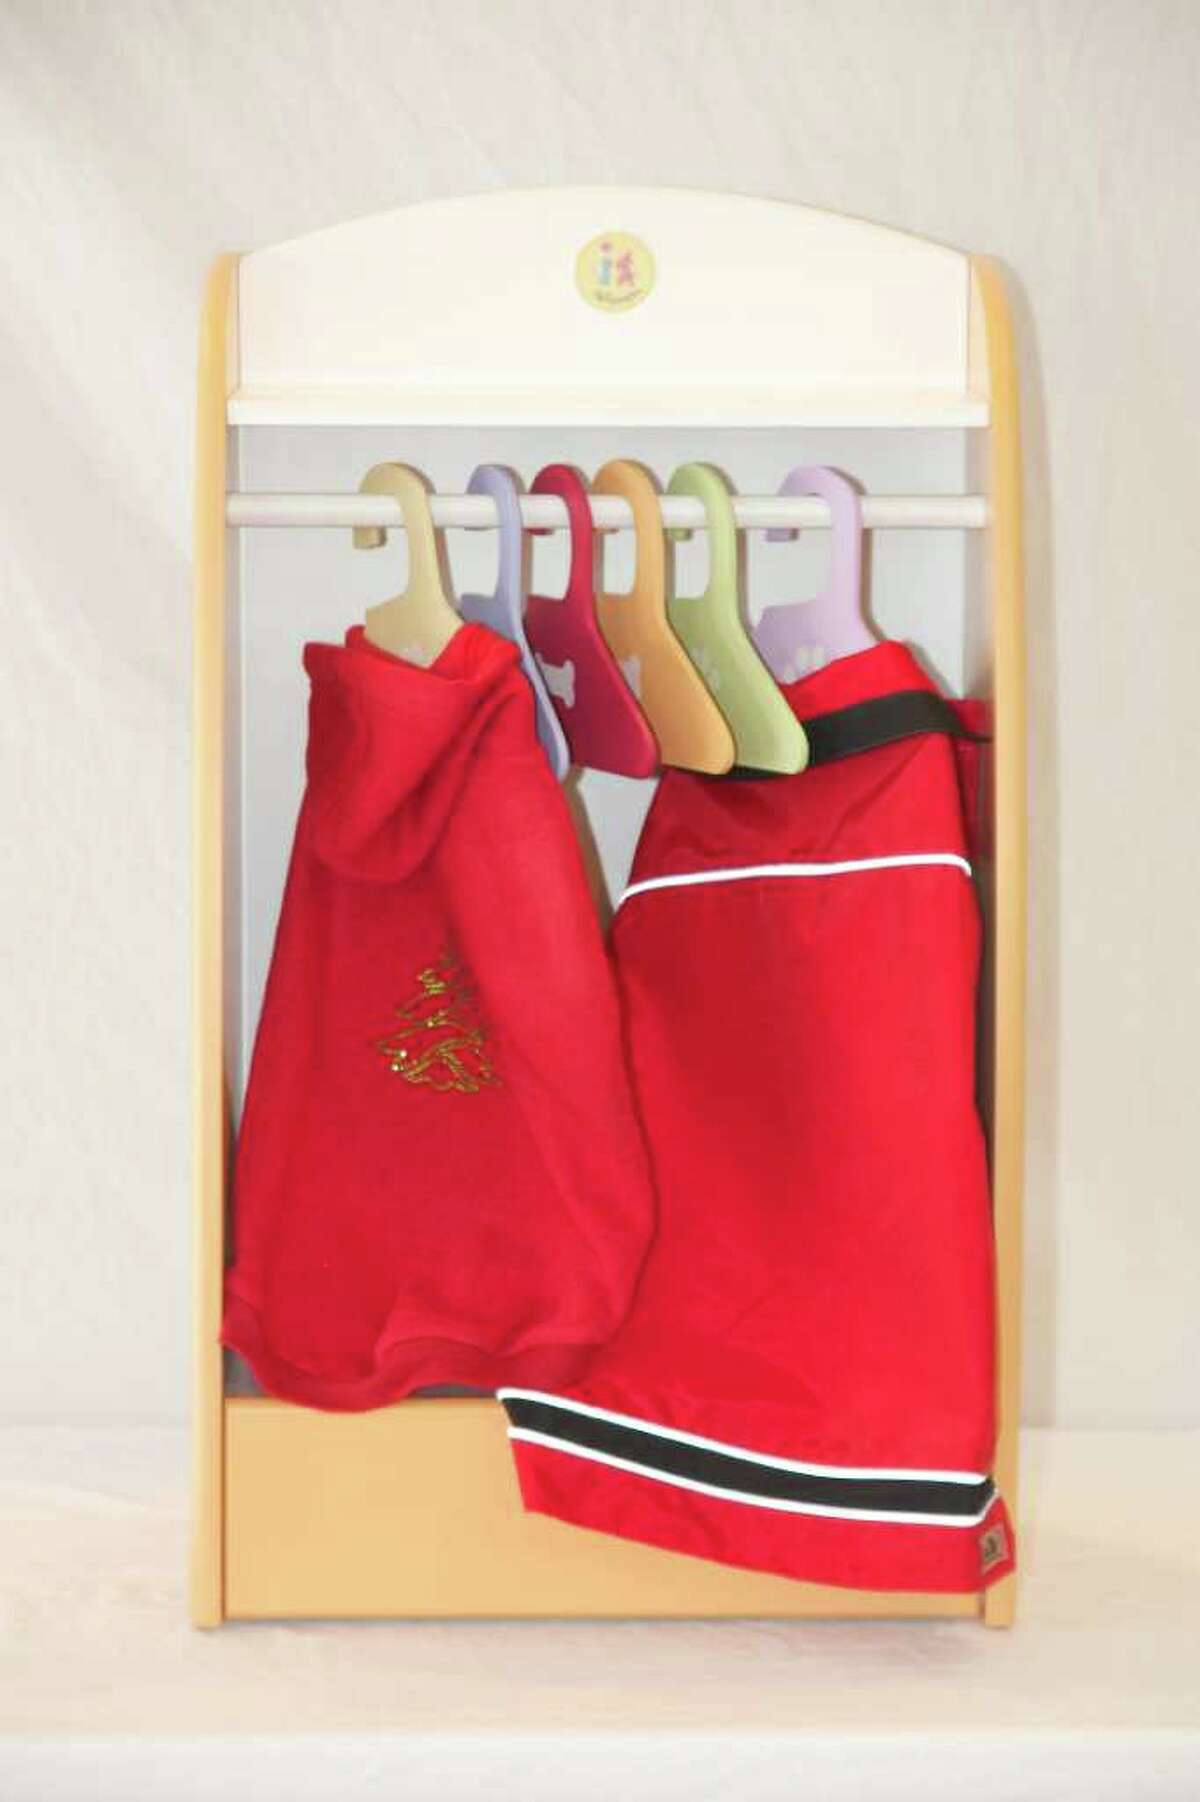 Dog Wardrobe Closet ($89.97) to store your dog's clothes. From DazzleDogDelight.com.